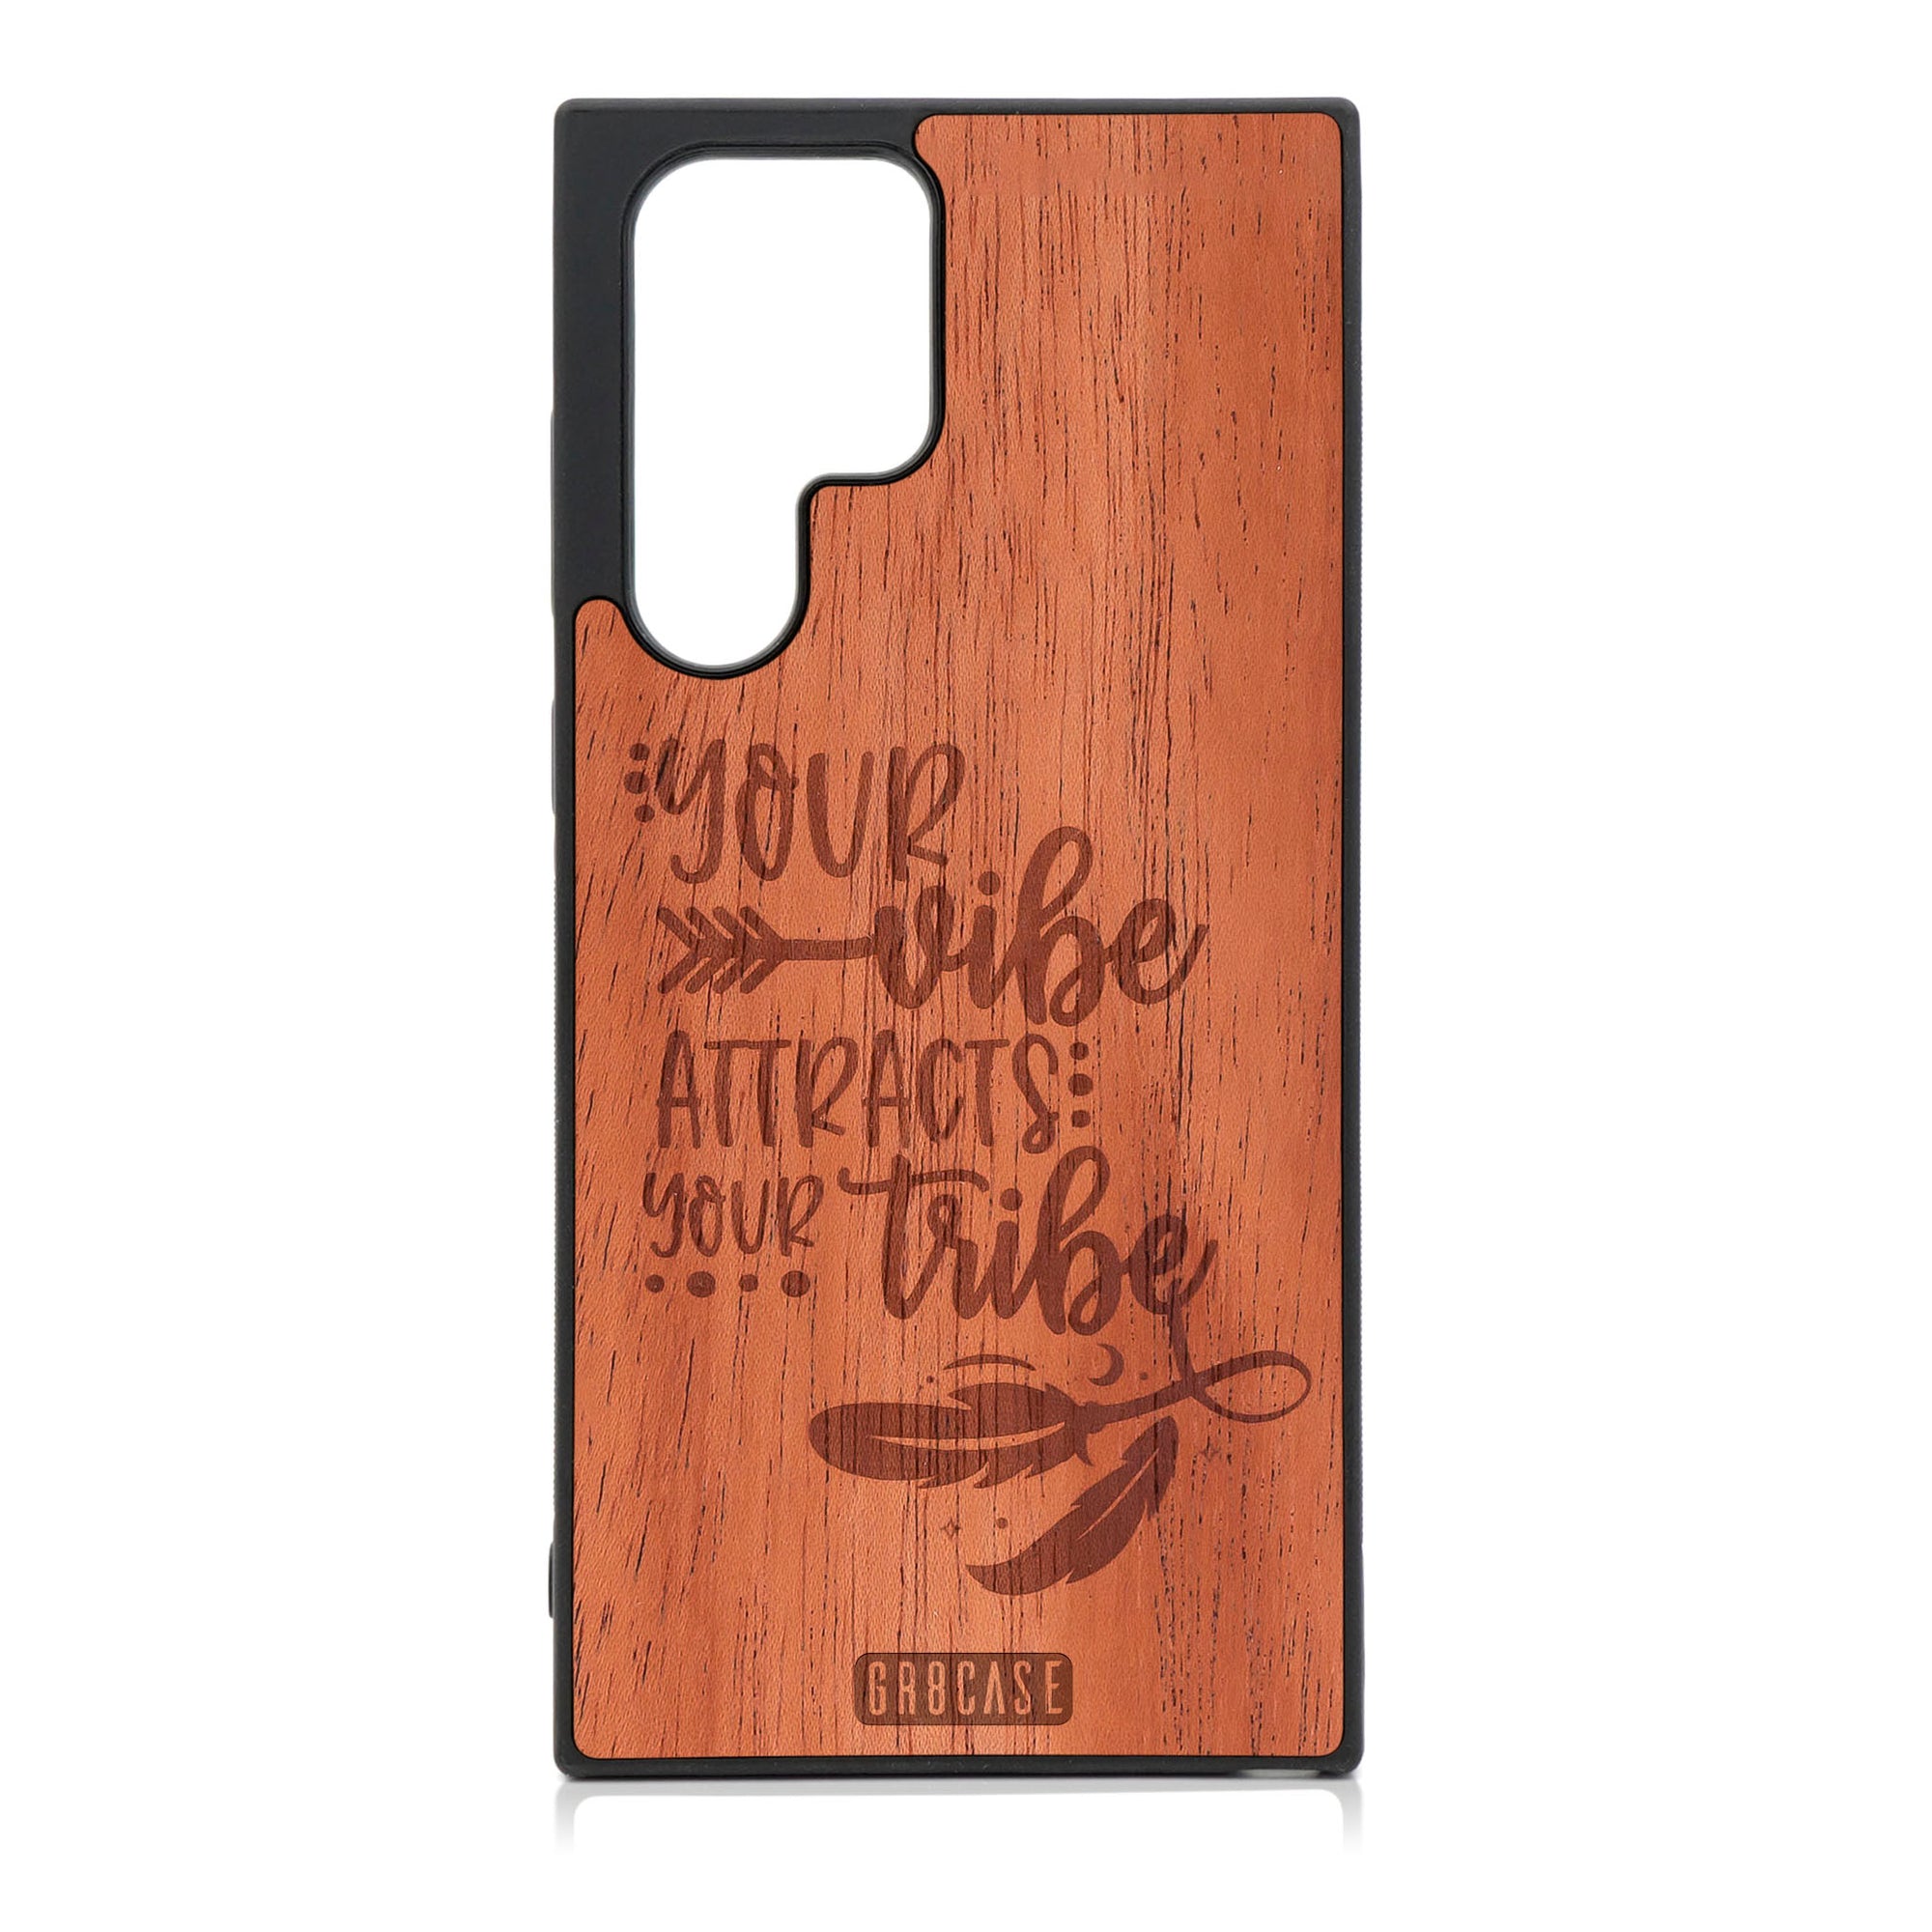 Your Vibe Attracts Your Tribe Design Wood Phone Case For Galaxy S22 Ultra